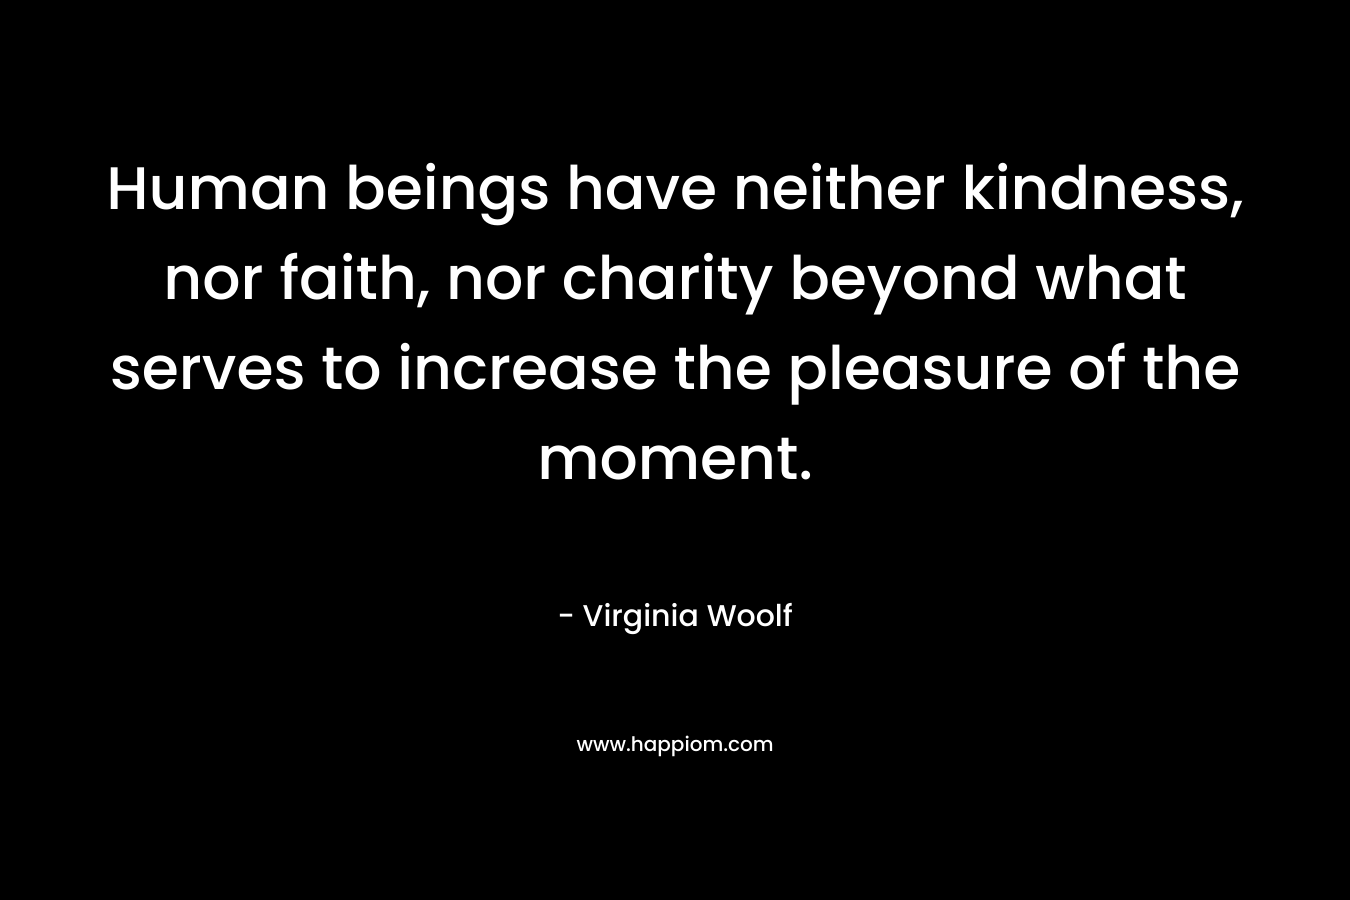 Human beings have neither kindness, nor faith, nor charity beyond what serves to increase the pleasure of the moment. – Virginia Woolf